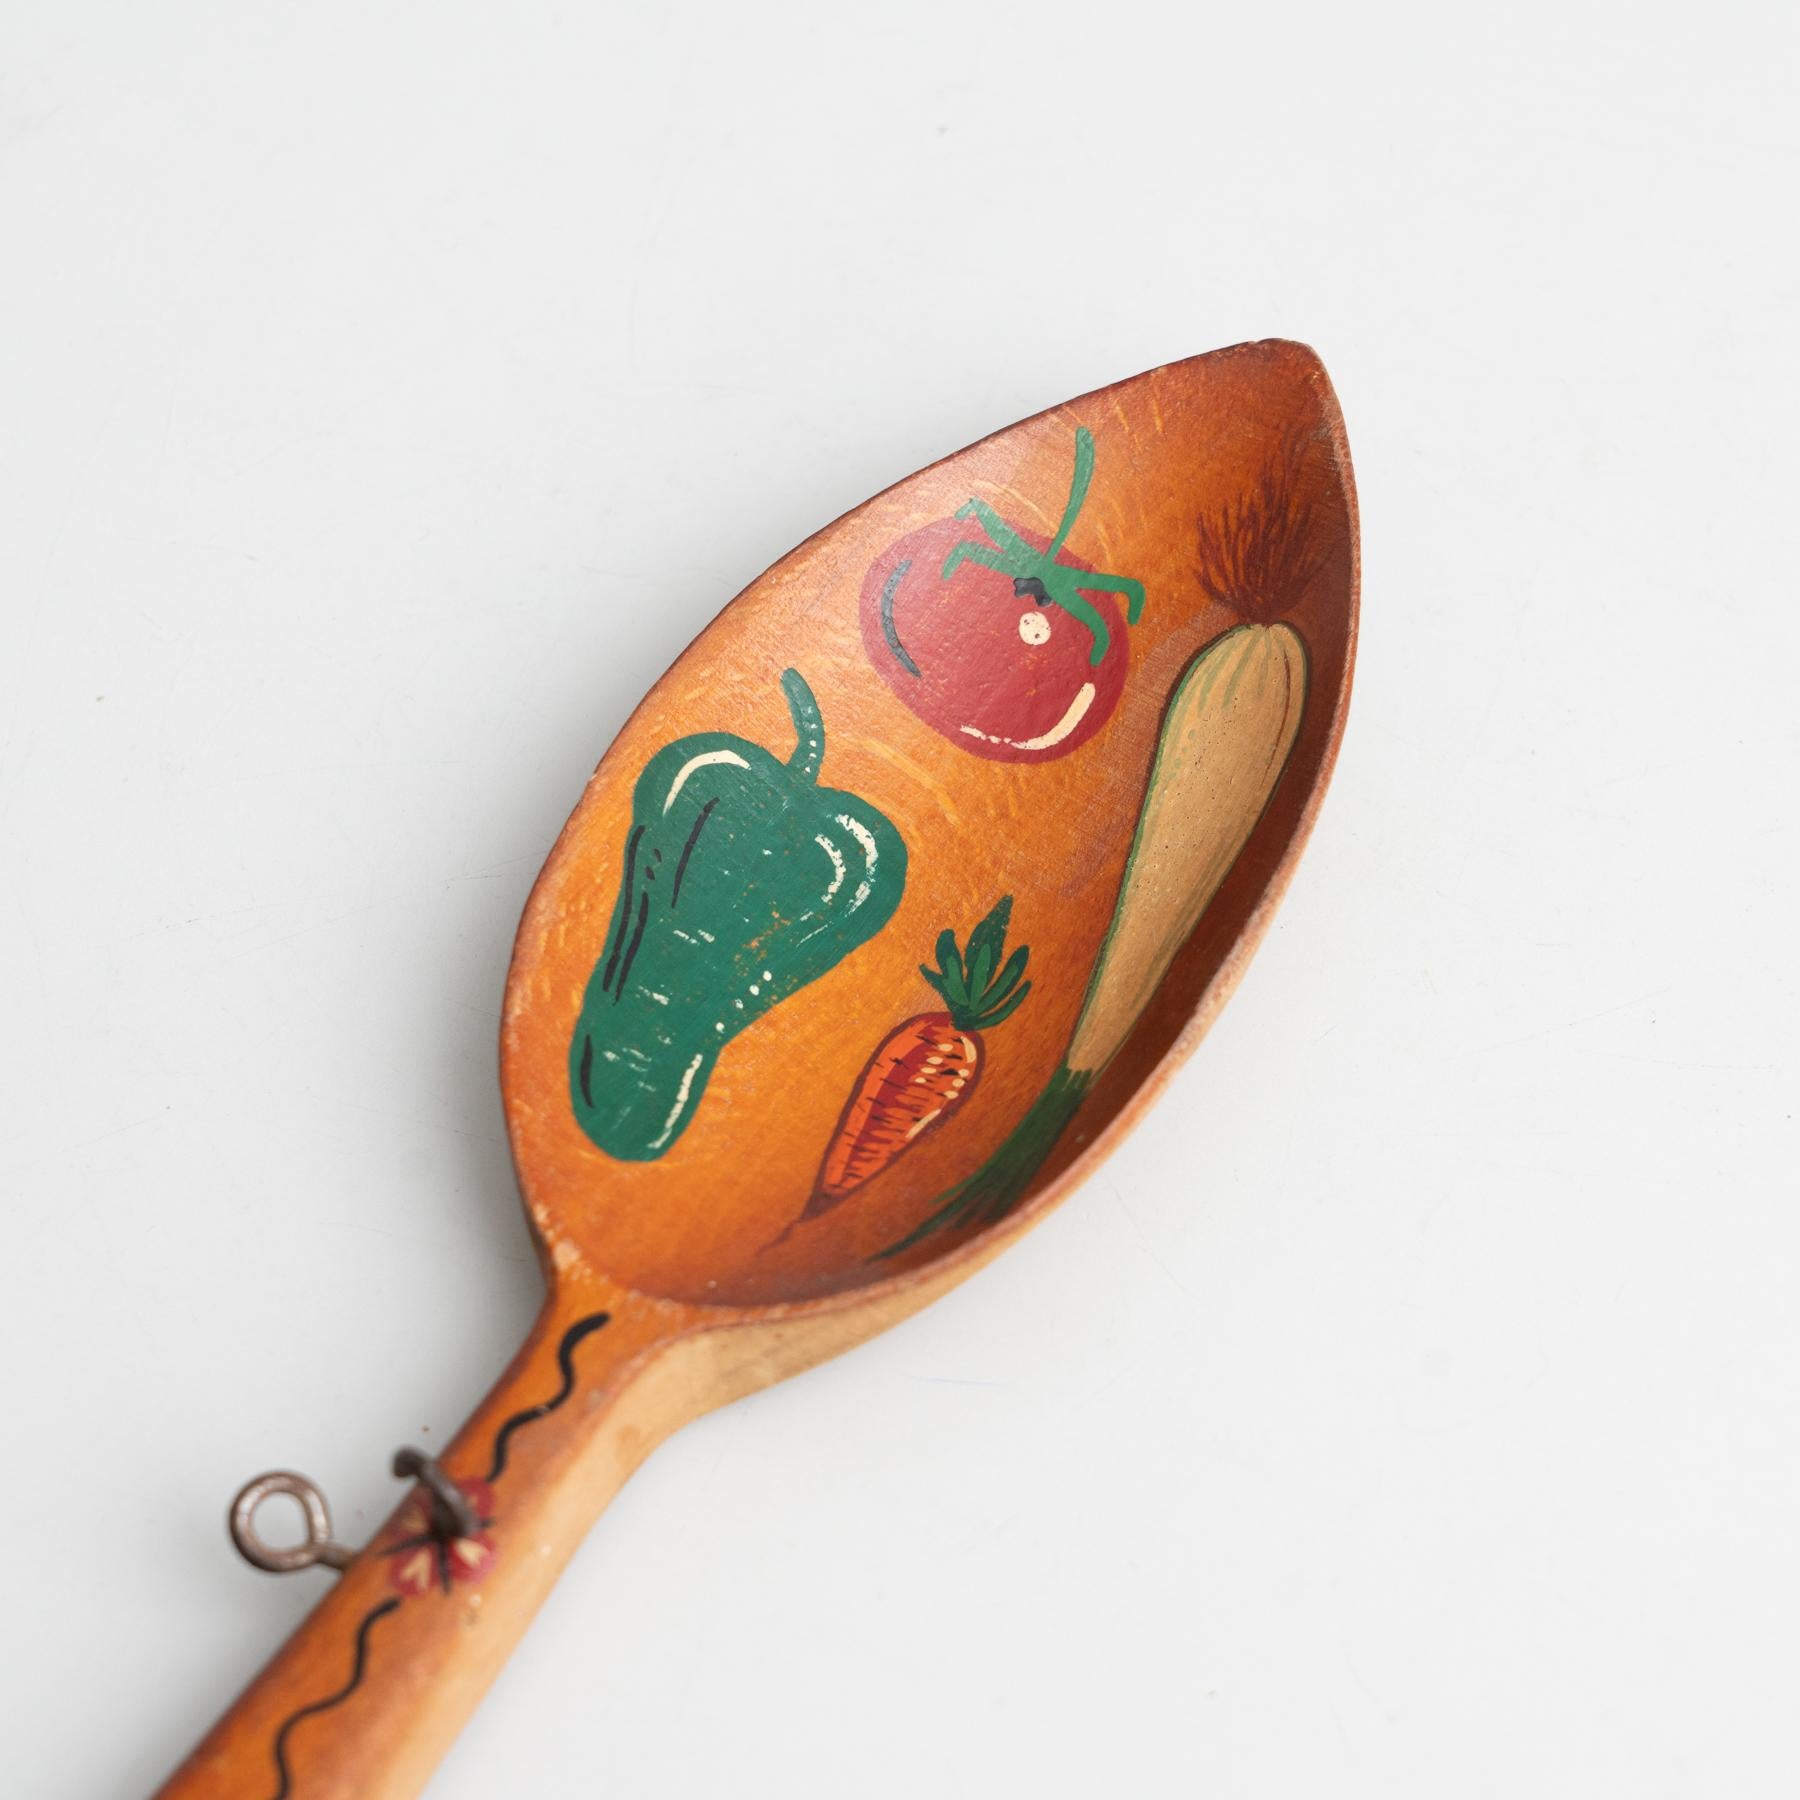 Hand-Painted Traditional Rustic Wood Hand Painted Spoon Artwork from Spain, circa 1970 For Sale